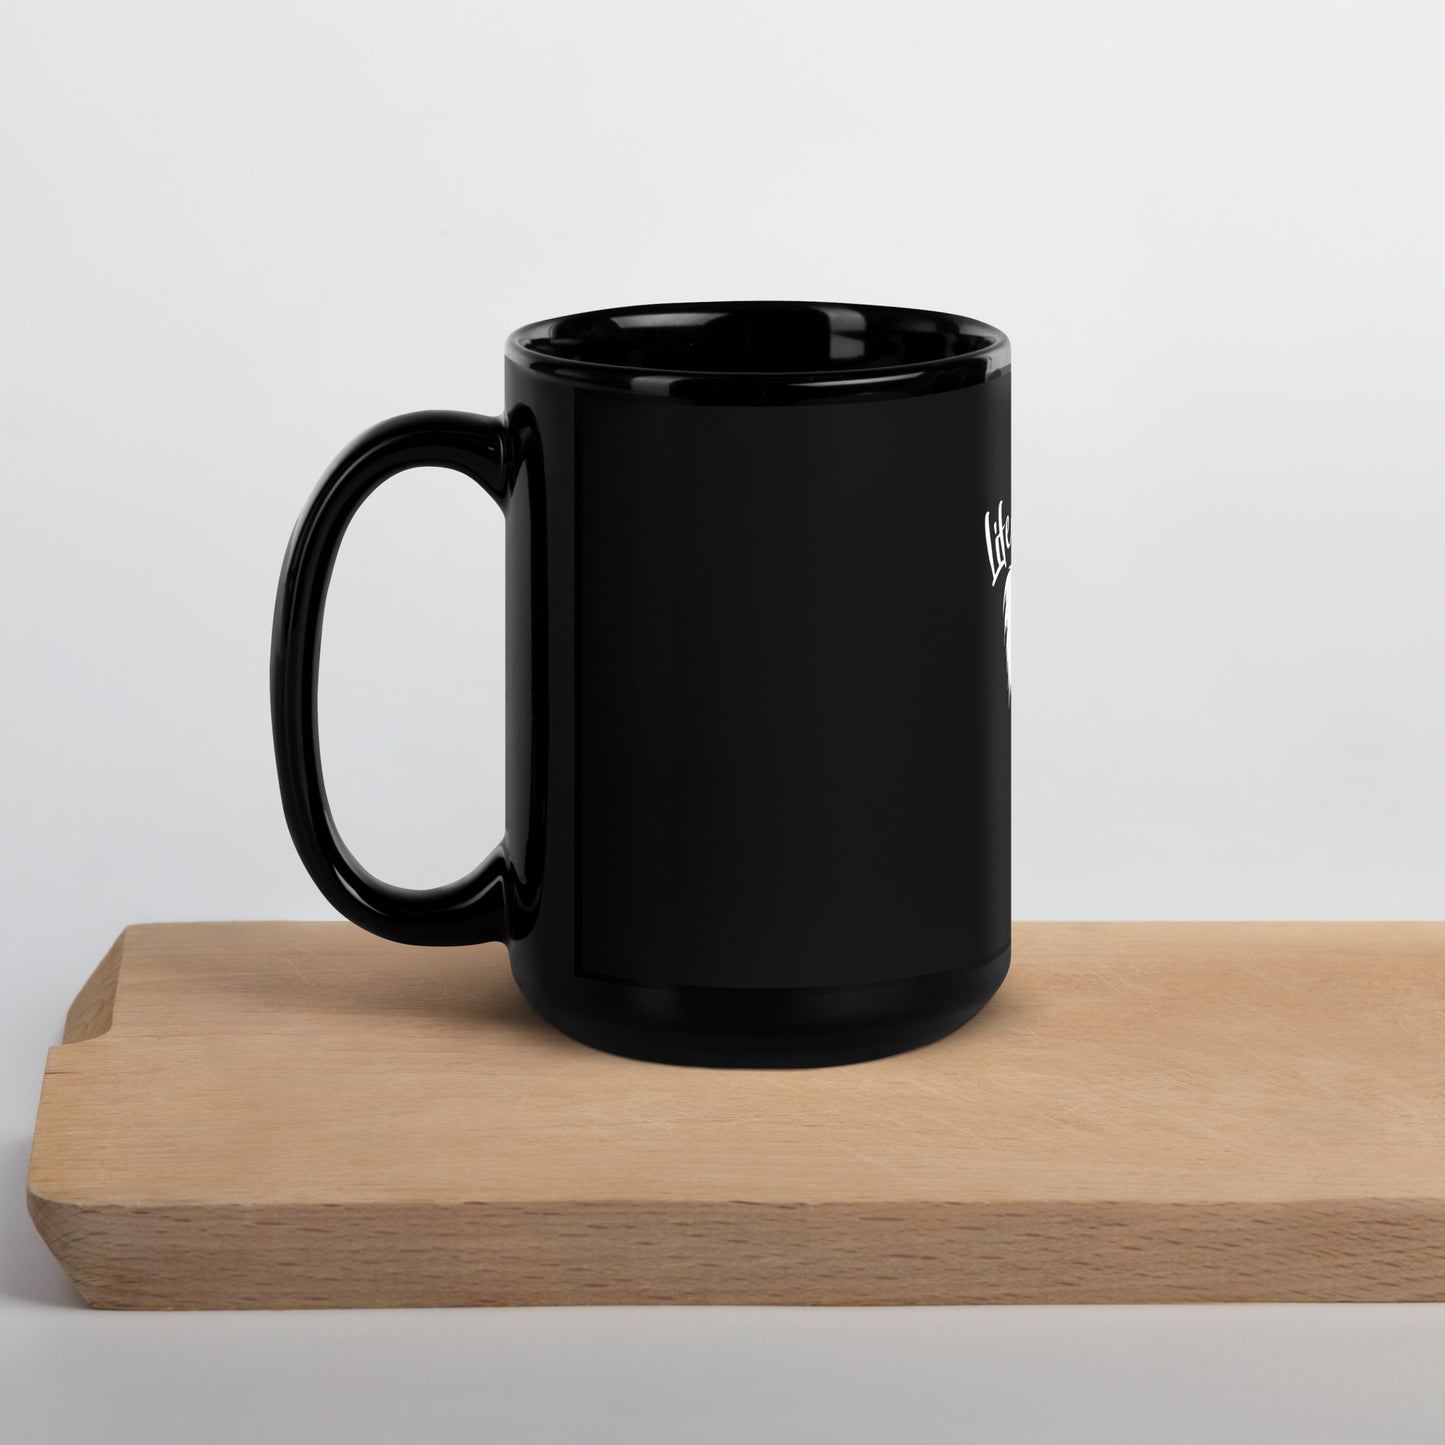 LIFE IS BETTER WITH A PAPILLON - Black Glossy Mug